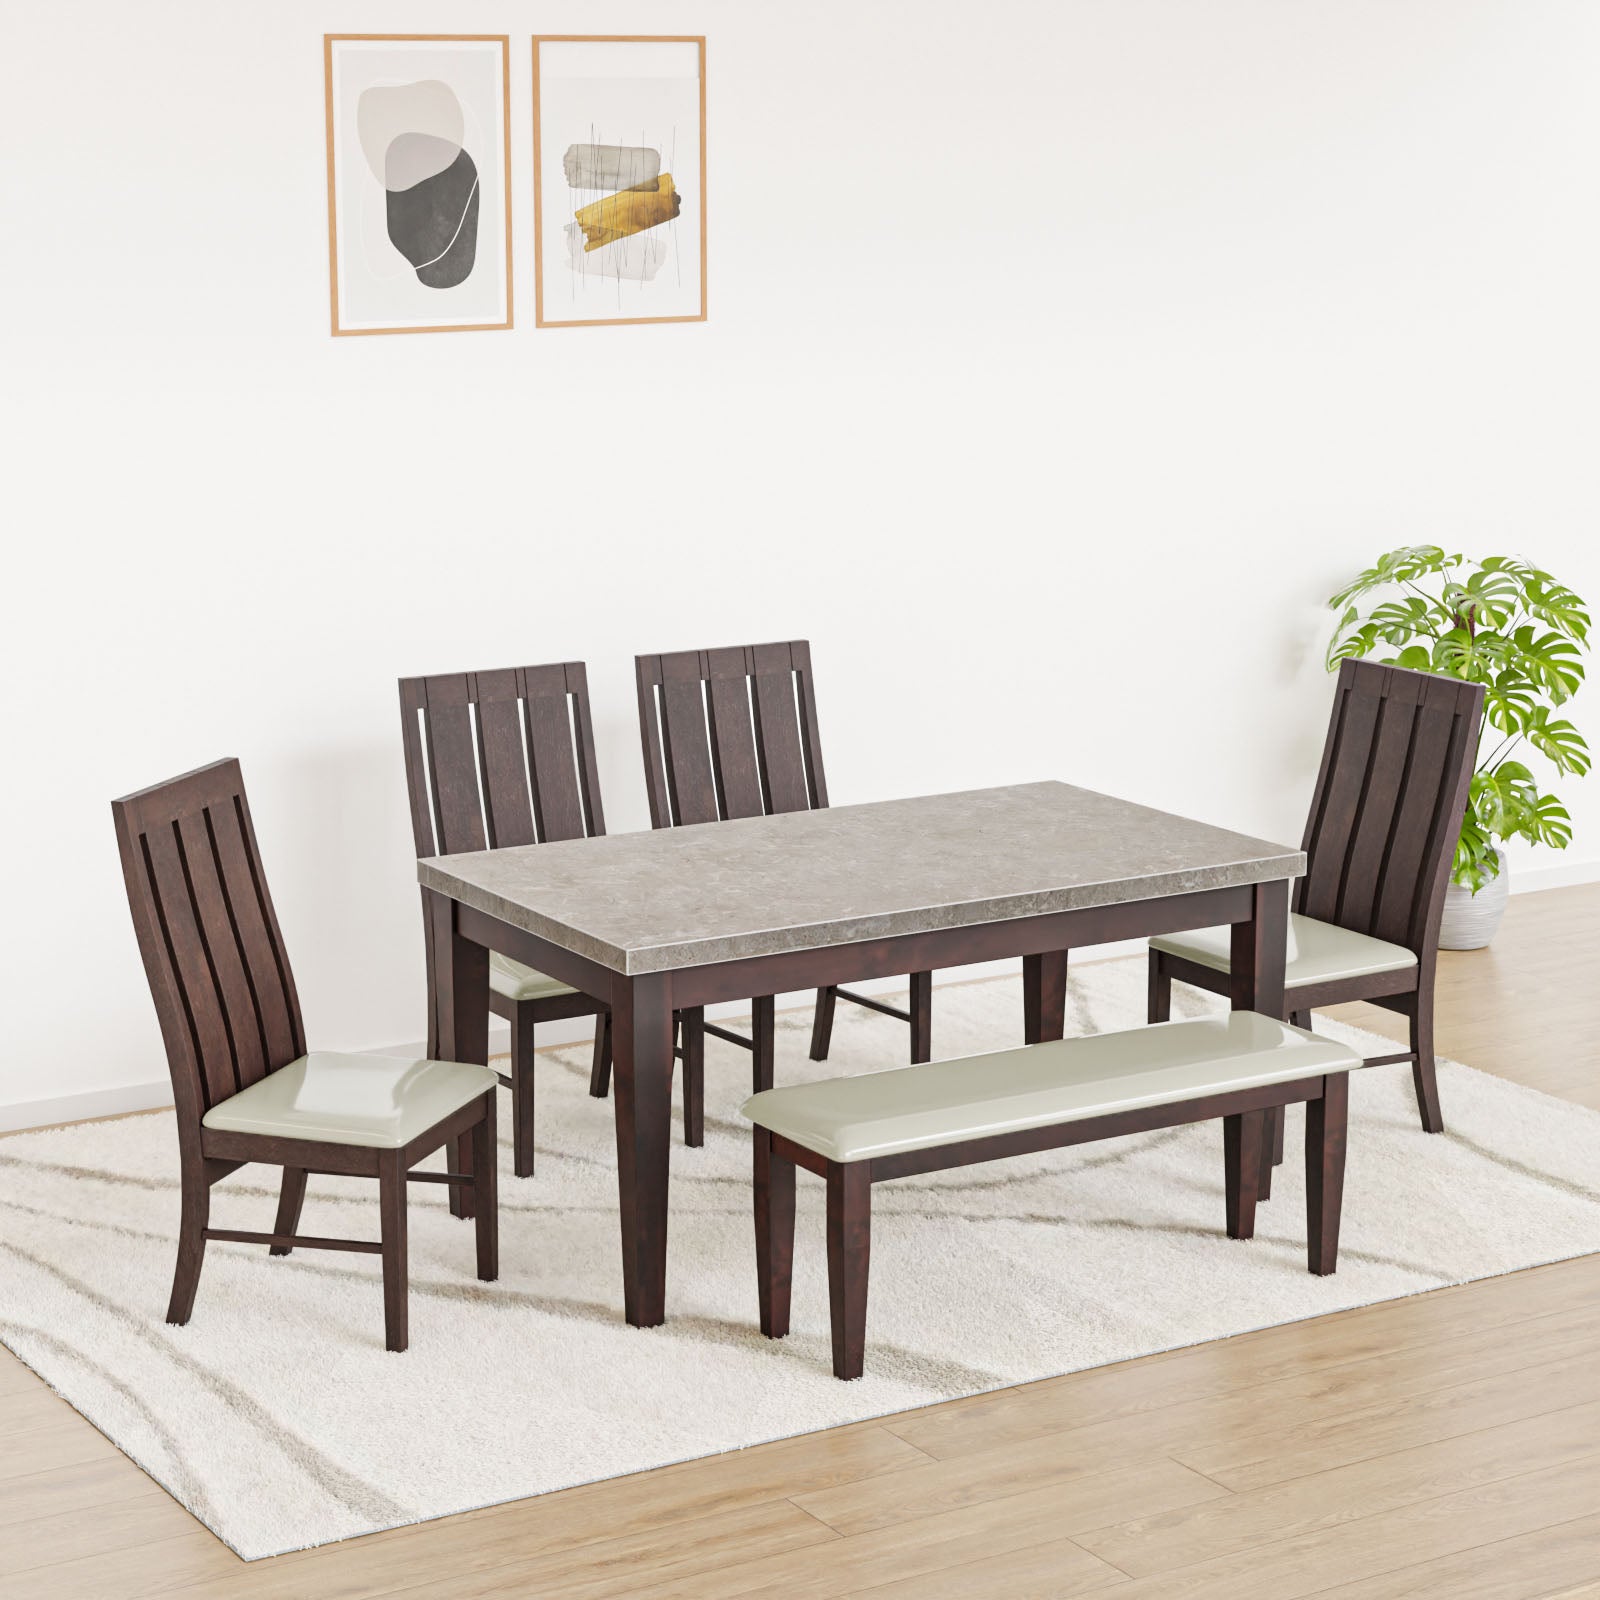 Ashton 6 Seater Solid Wood Dining Set With Bench (Milky White & Walnut)